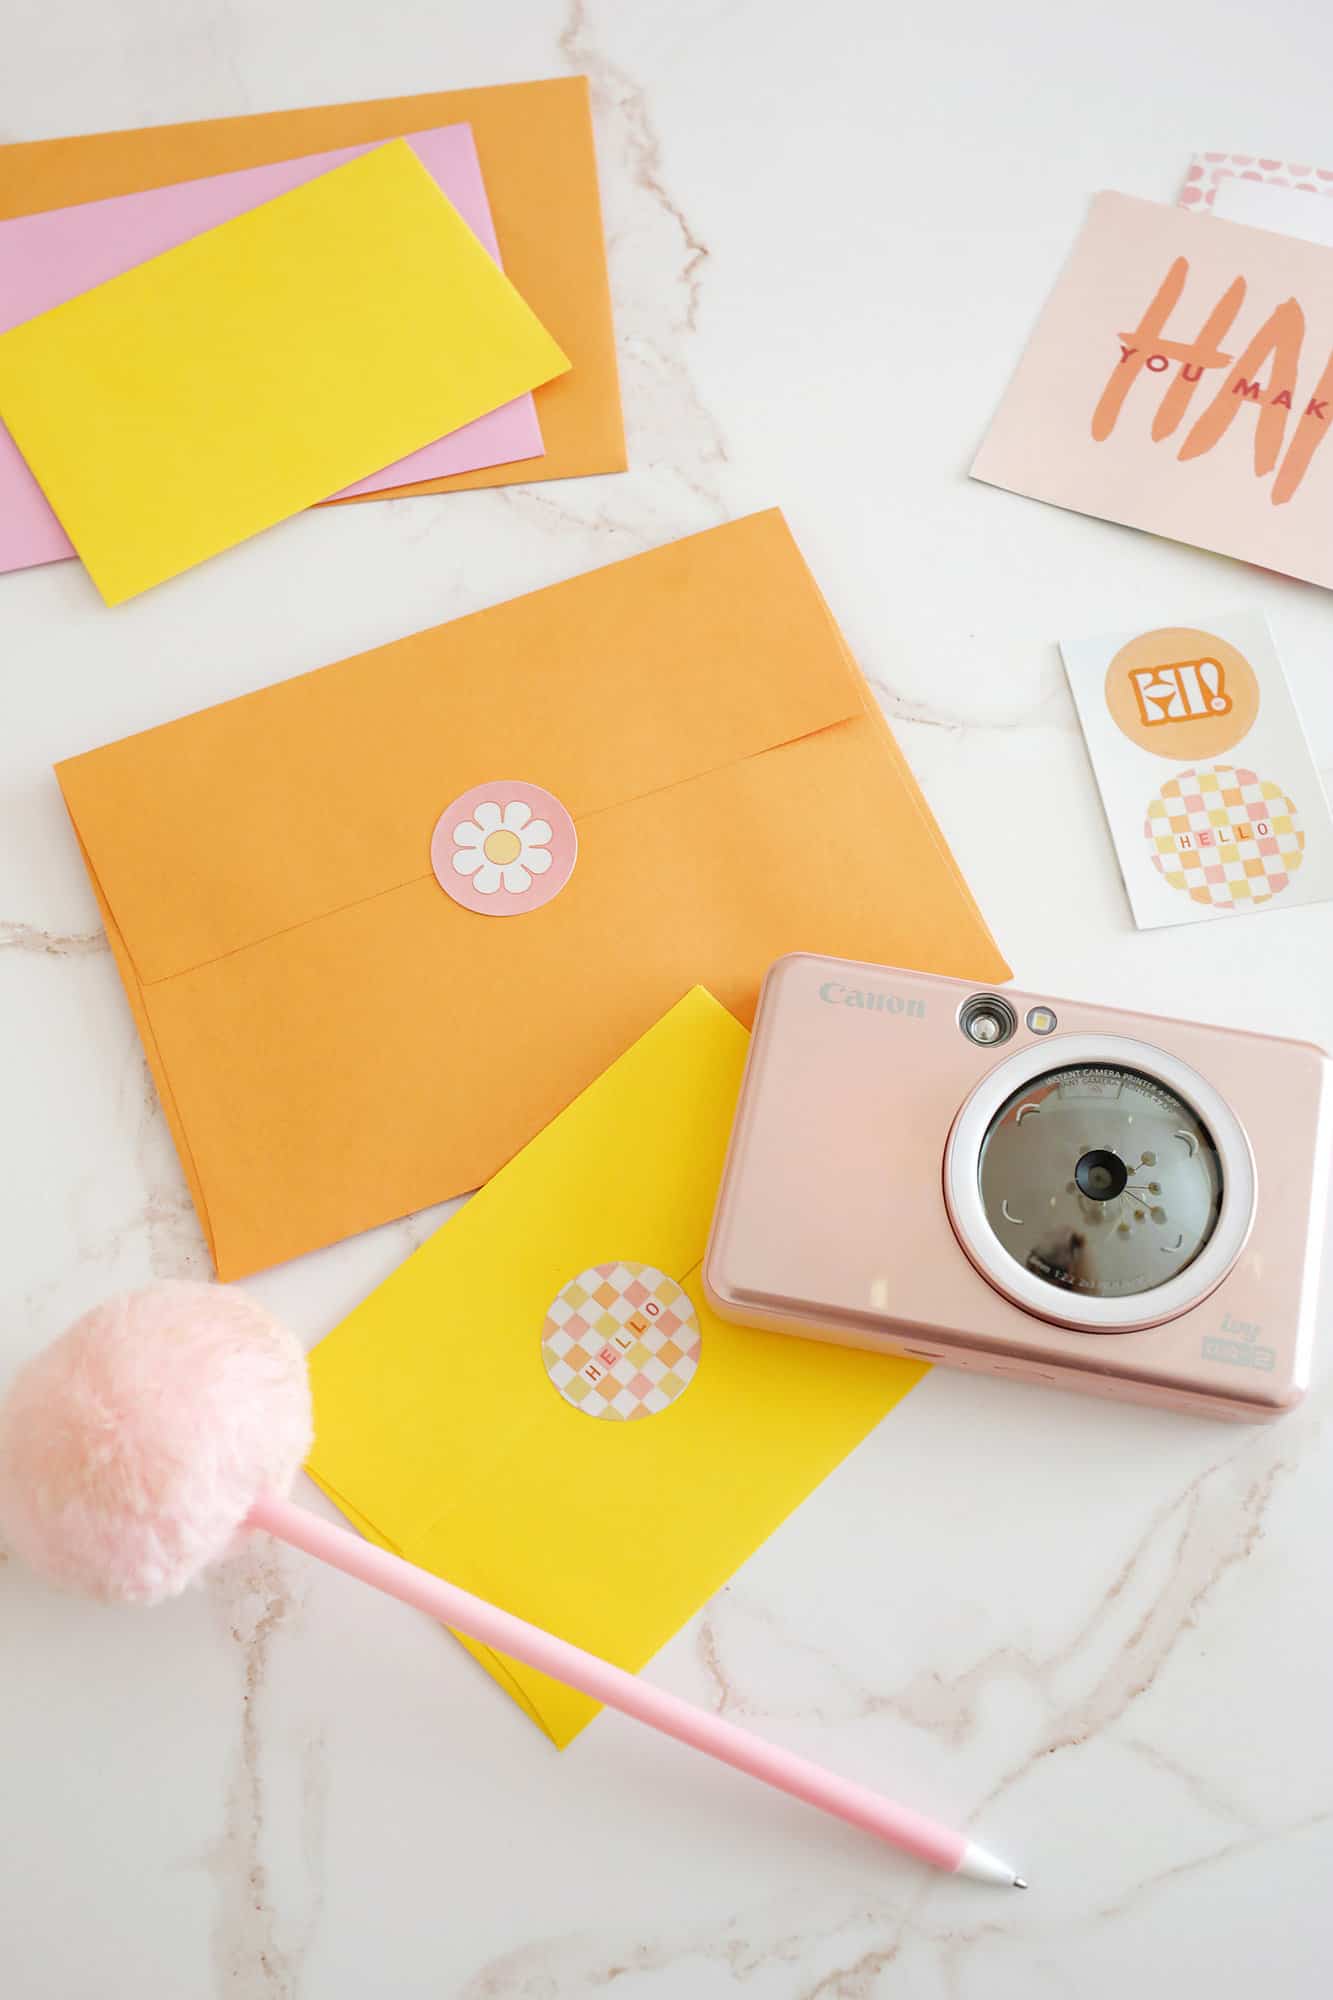 Added custom mail stickers to colored envelopes next to the instant camera